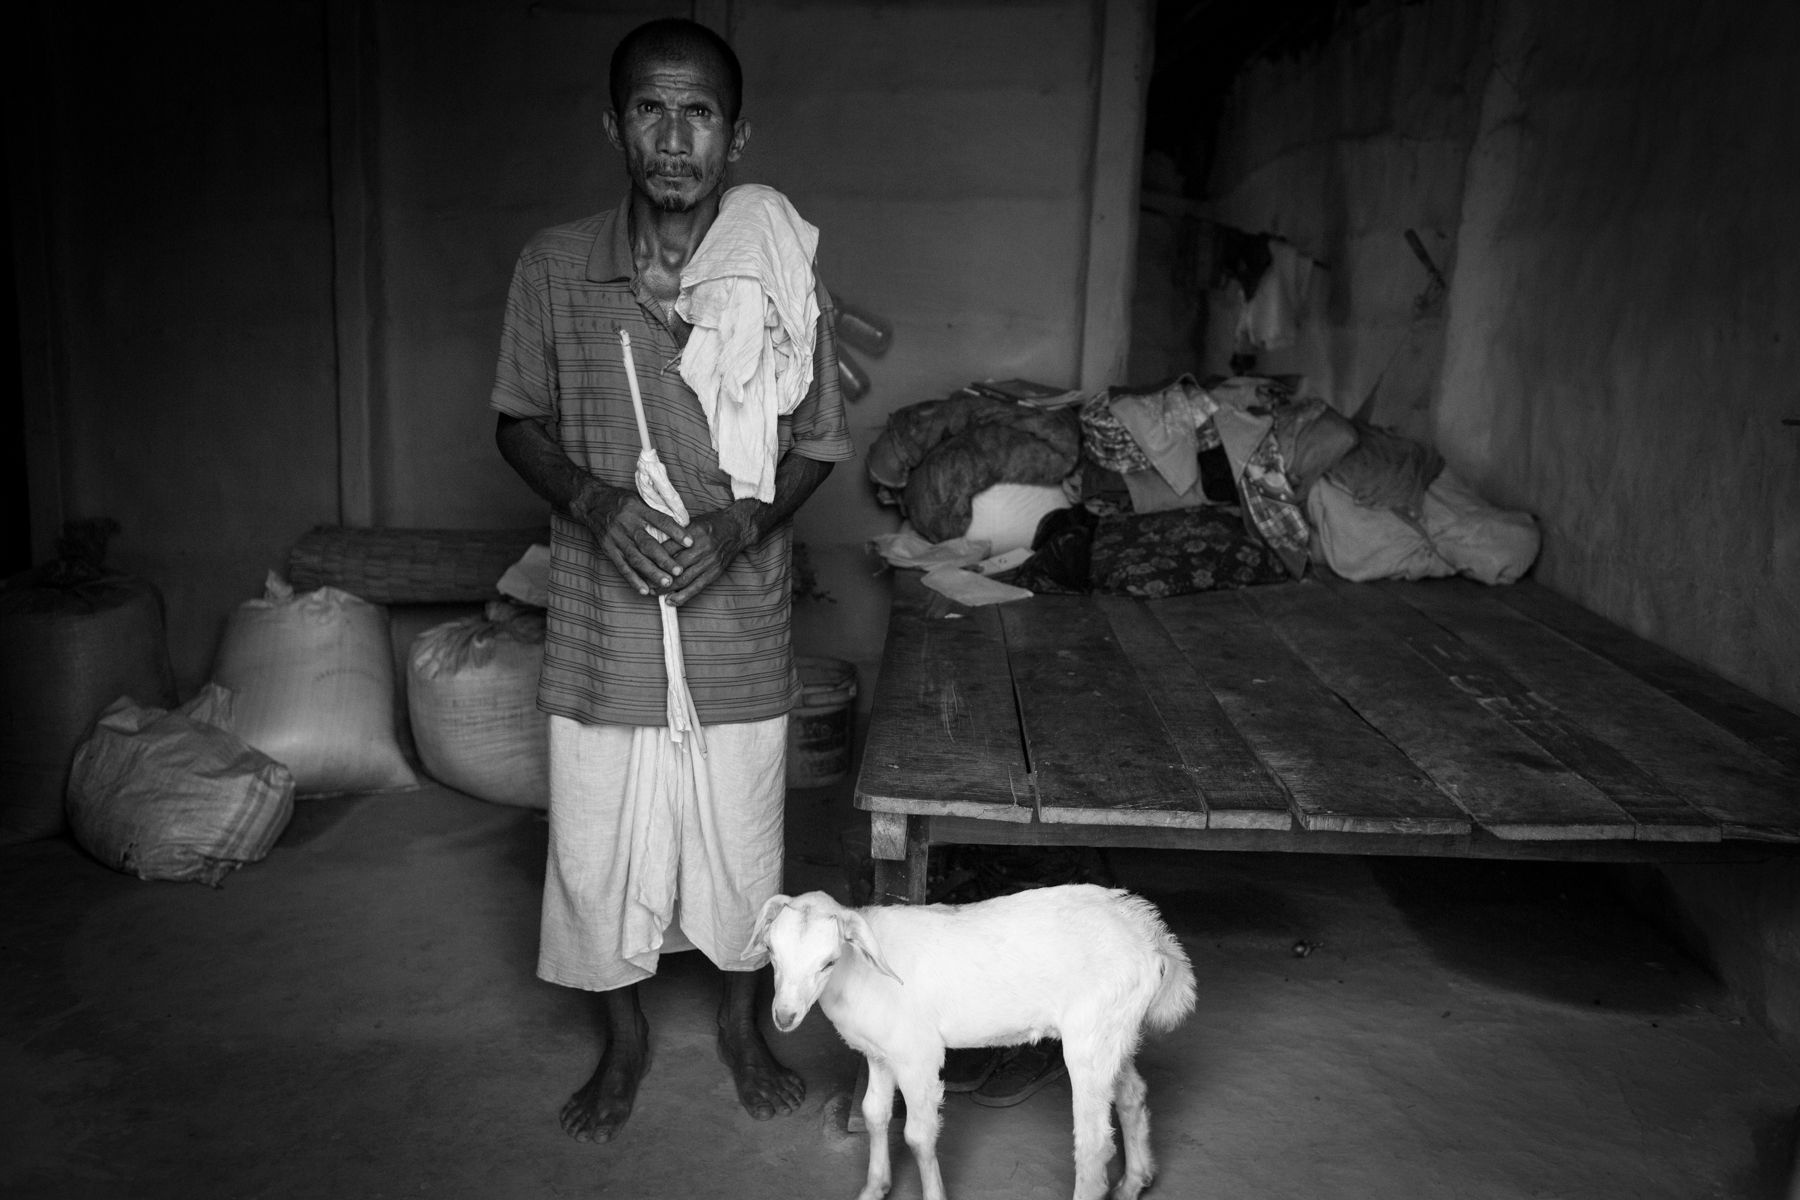 Bhagan Chaudhary, the husband of the late Parvati Devi, stands near their bed, out of which she was forcefully dragged. 24 August 2013, Supauli, Parsa, Nepal.